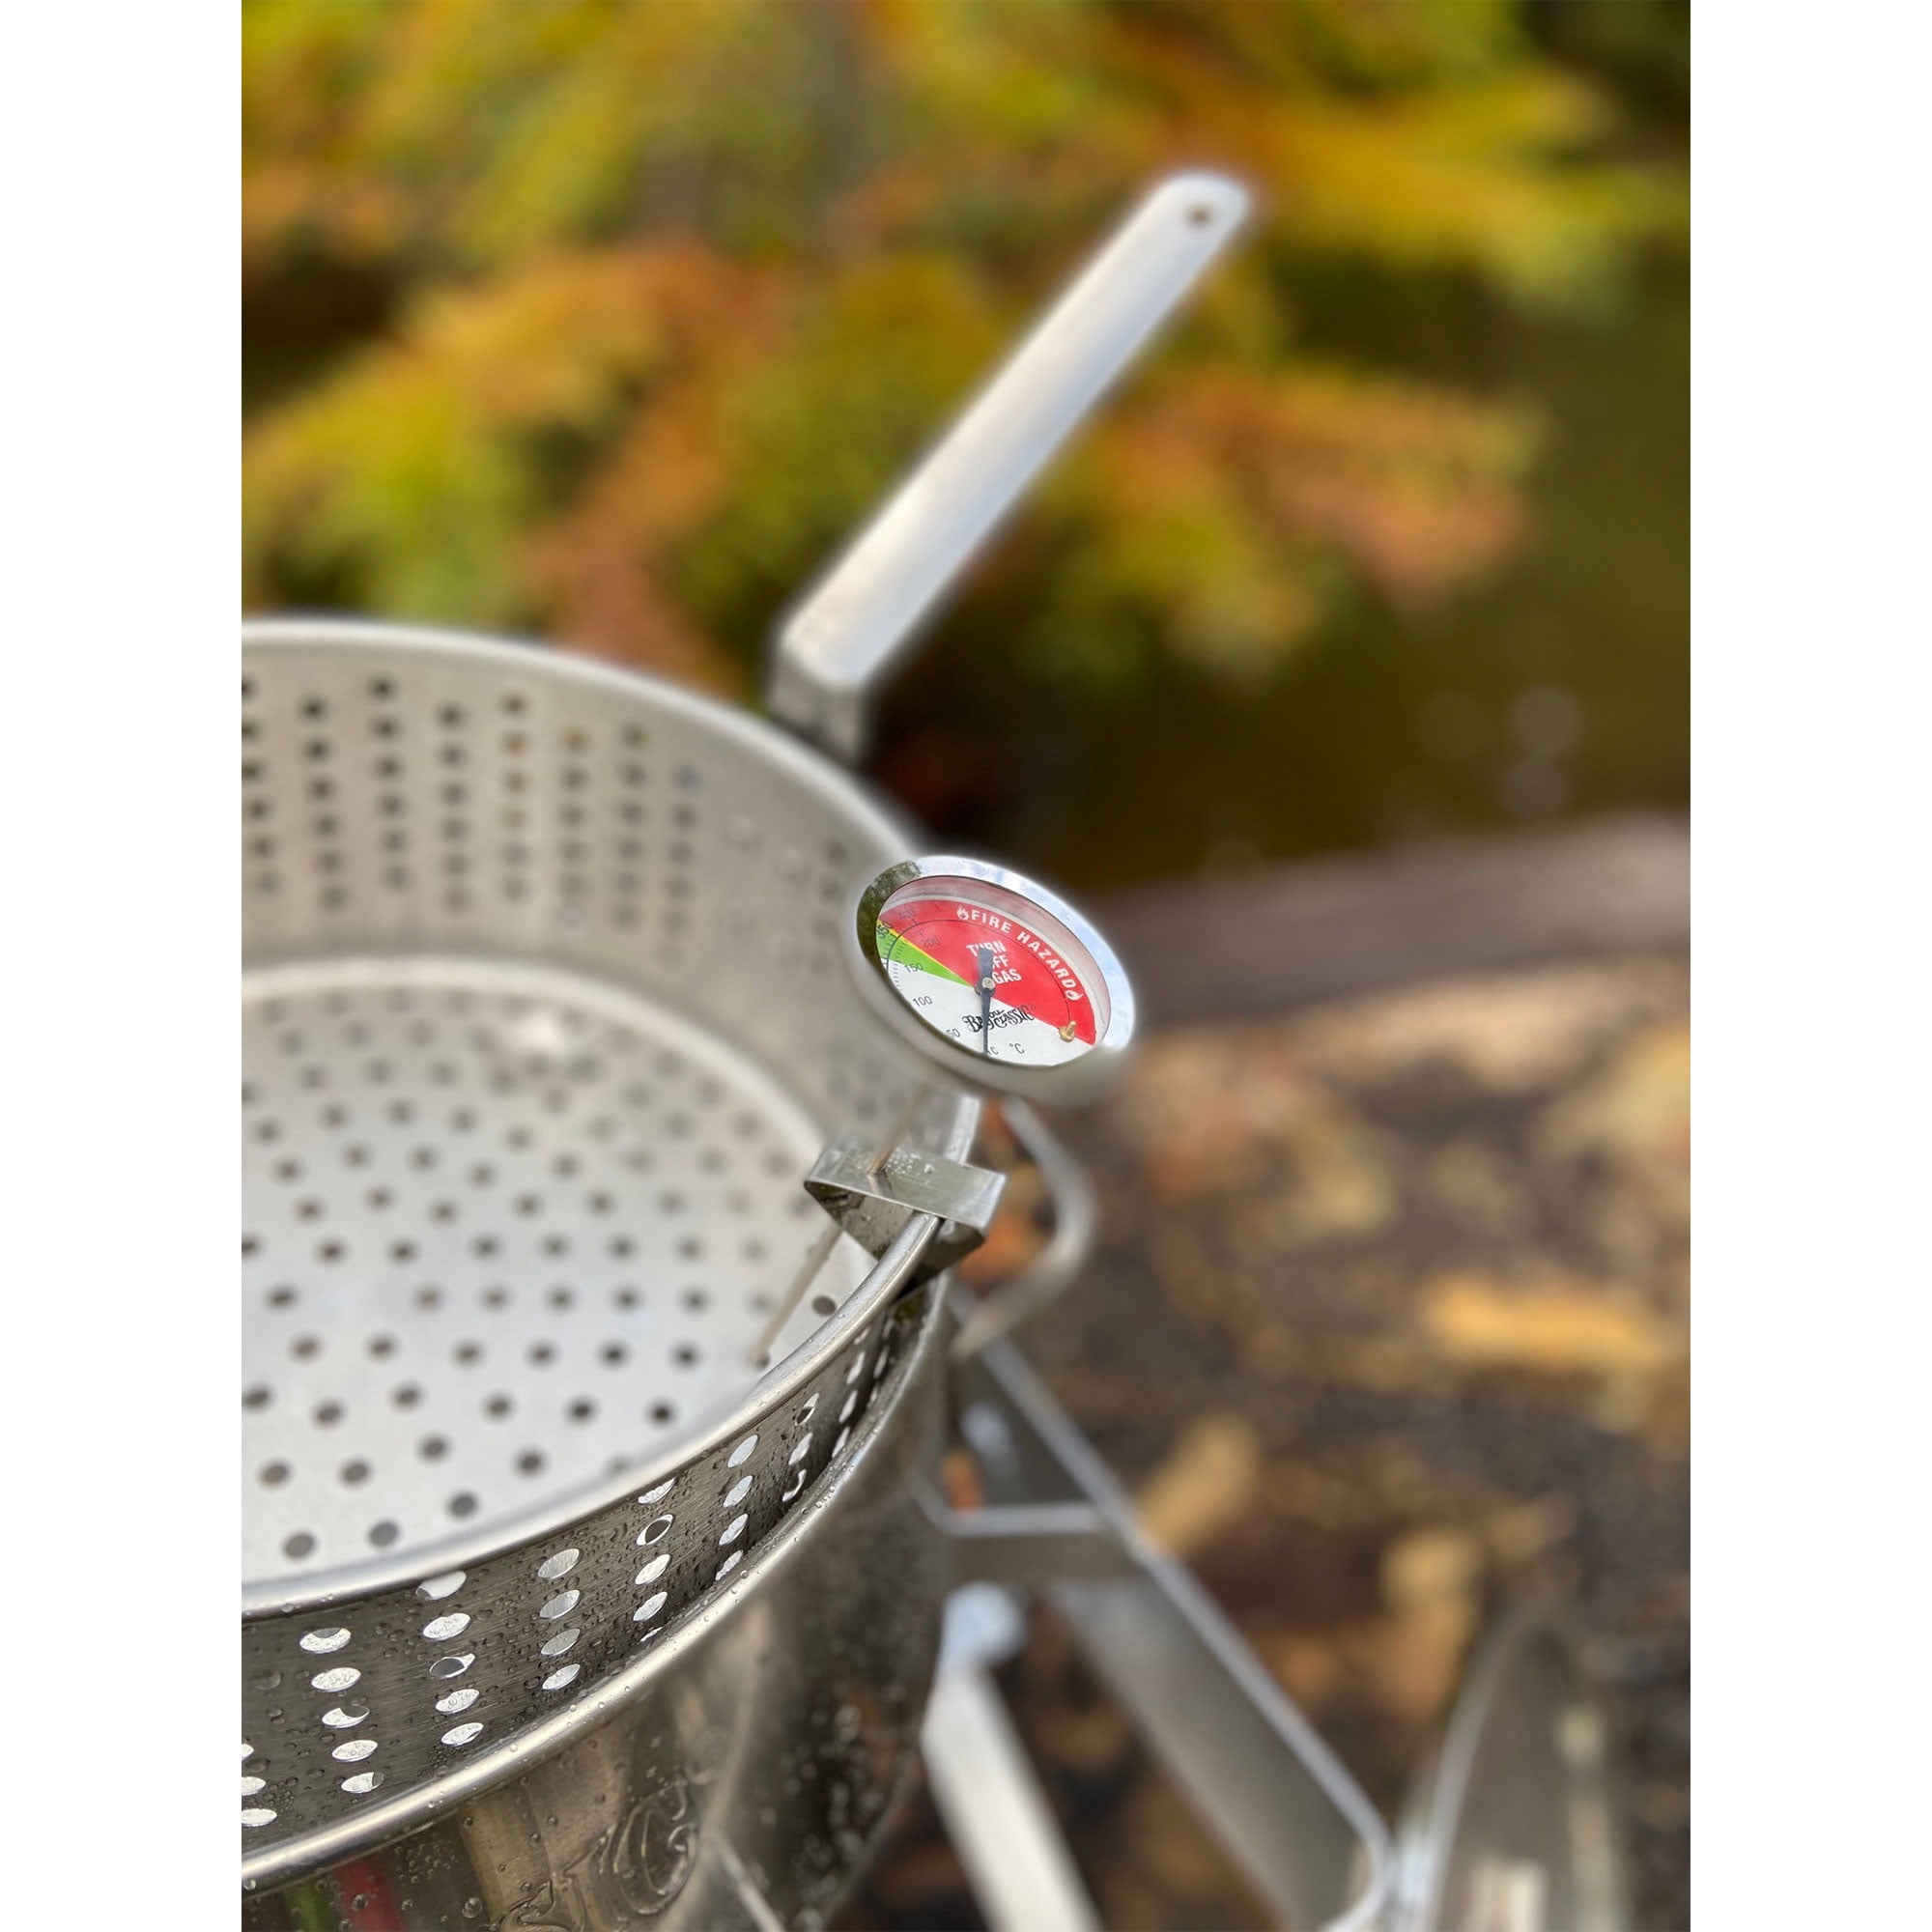 Bayou Classic 1201 10-qt Aluminum Fry Pot Features Perforated Aluminum  Basket Heavy Duty Riveted Handles Perfect For Deep Frying French Fries Hush